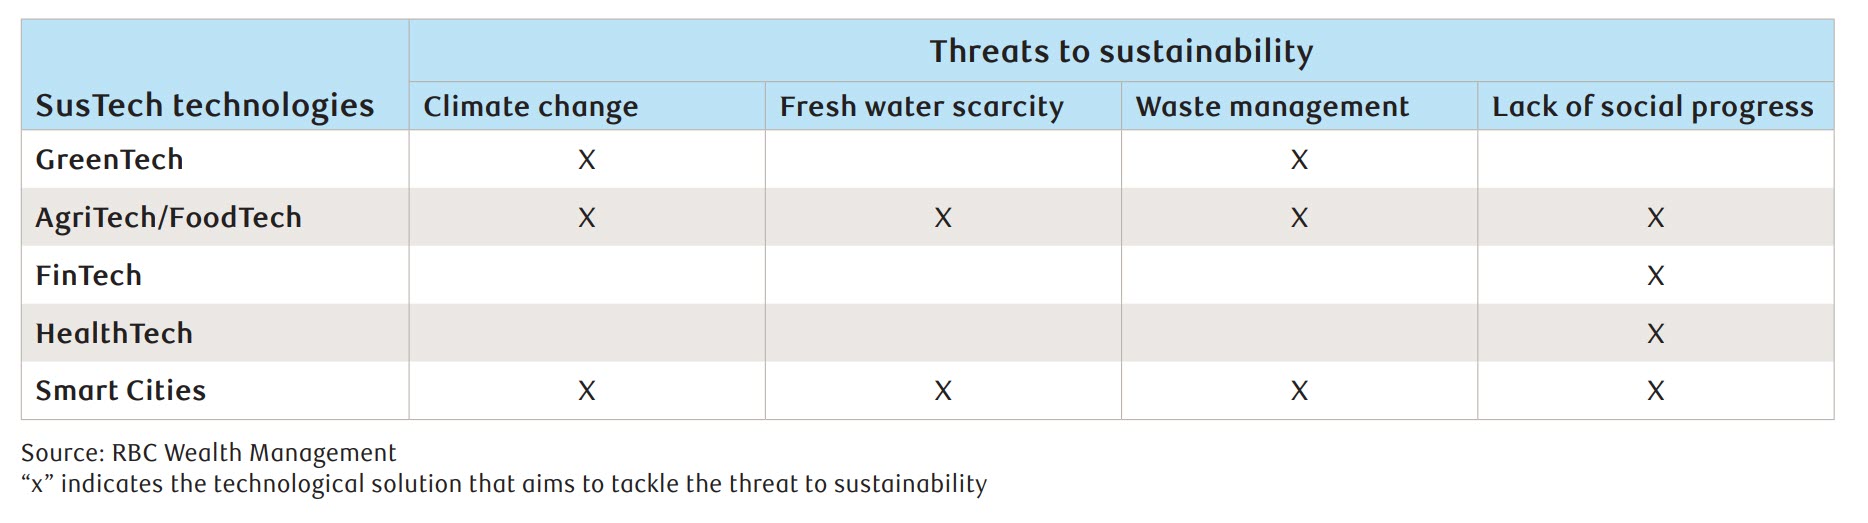 a chart featuring susTech Techologies and what threats to sustainability exists in each Green Tech: Climate Change, Waste management; AgriTech/Food Tech: Climate change, fresh water scarcity, waste management and lack of social progress; FinTech: Lack of coial progress; Health Tech: lack of social progress; Smart cities: Climate change, freshwater scarcity, waste management and lack of social progress. Source: RBC Wealth Management